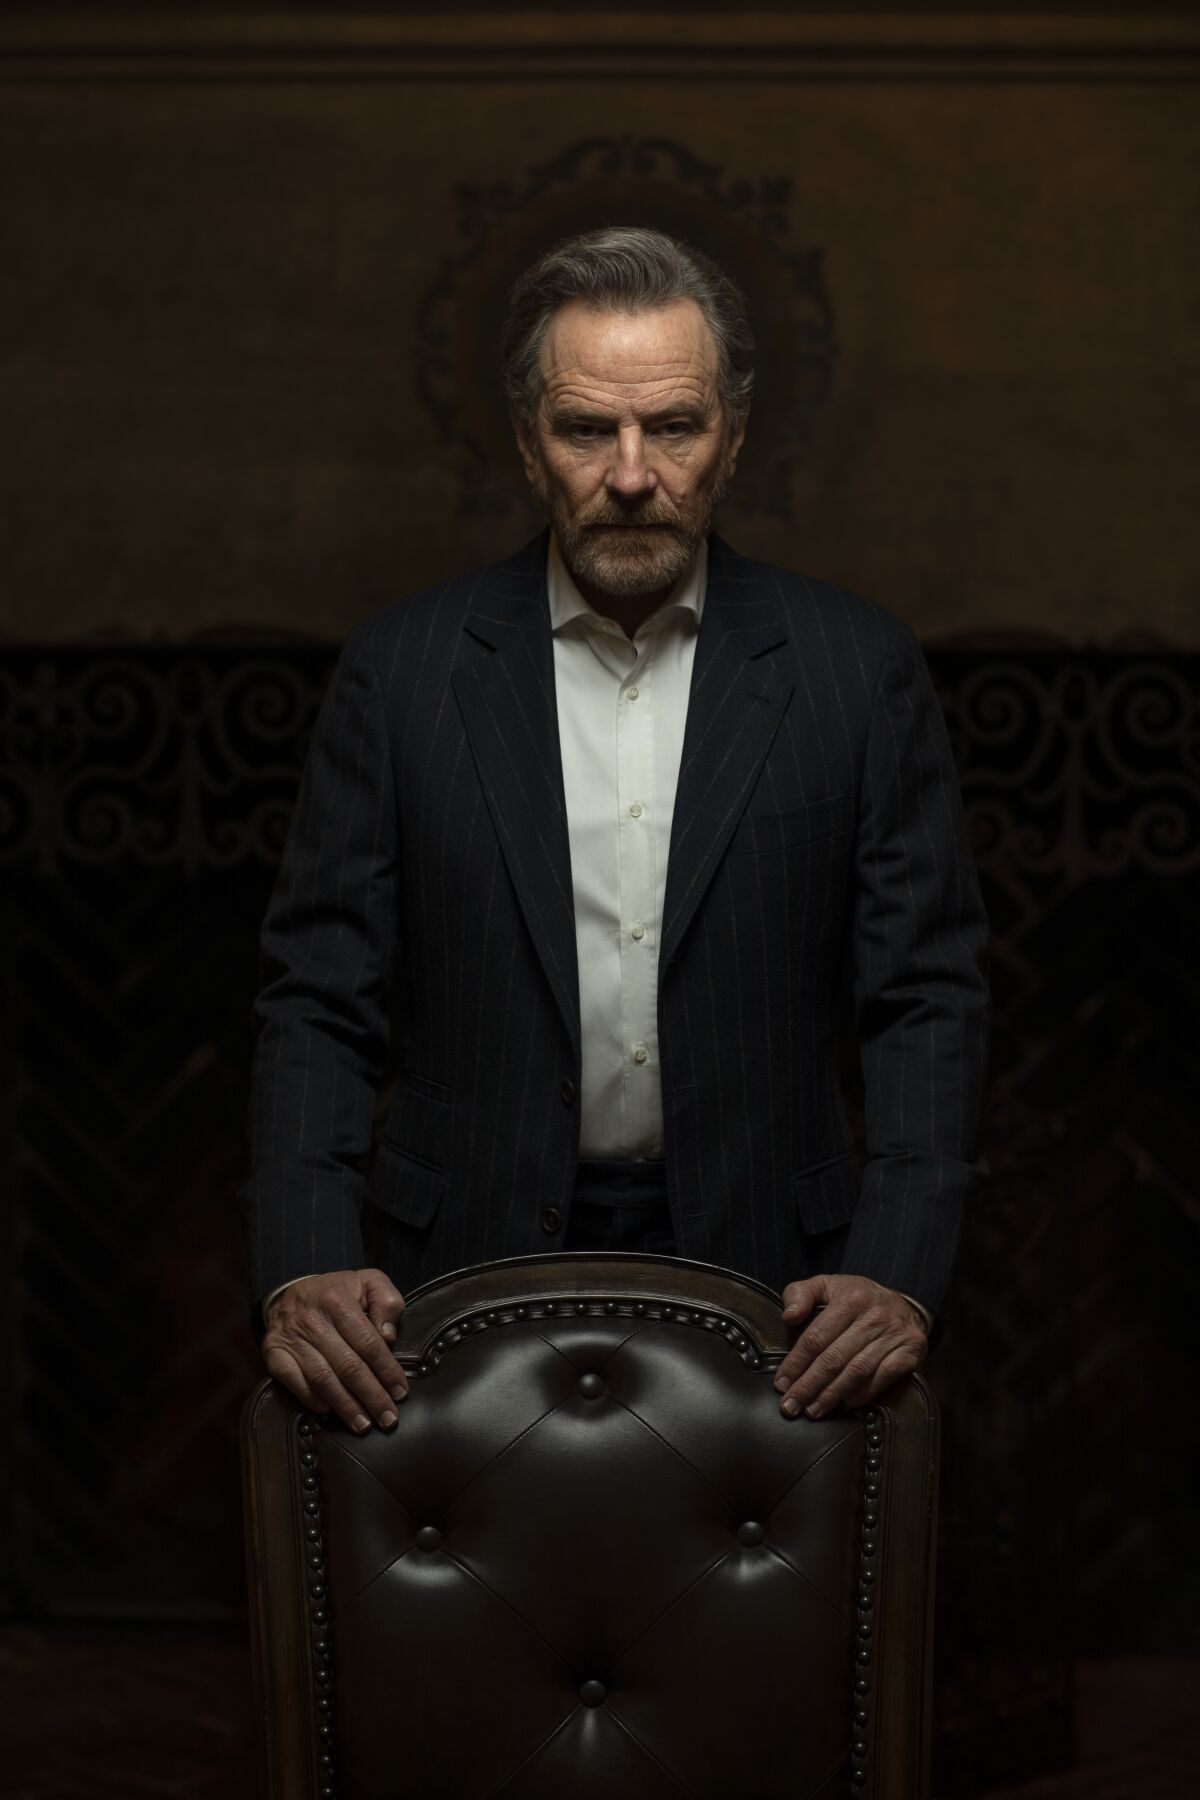 Actor Bryan Cranston, shrouded in shadows, stands dramatically behind a leather club chair.